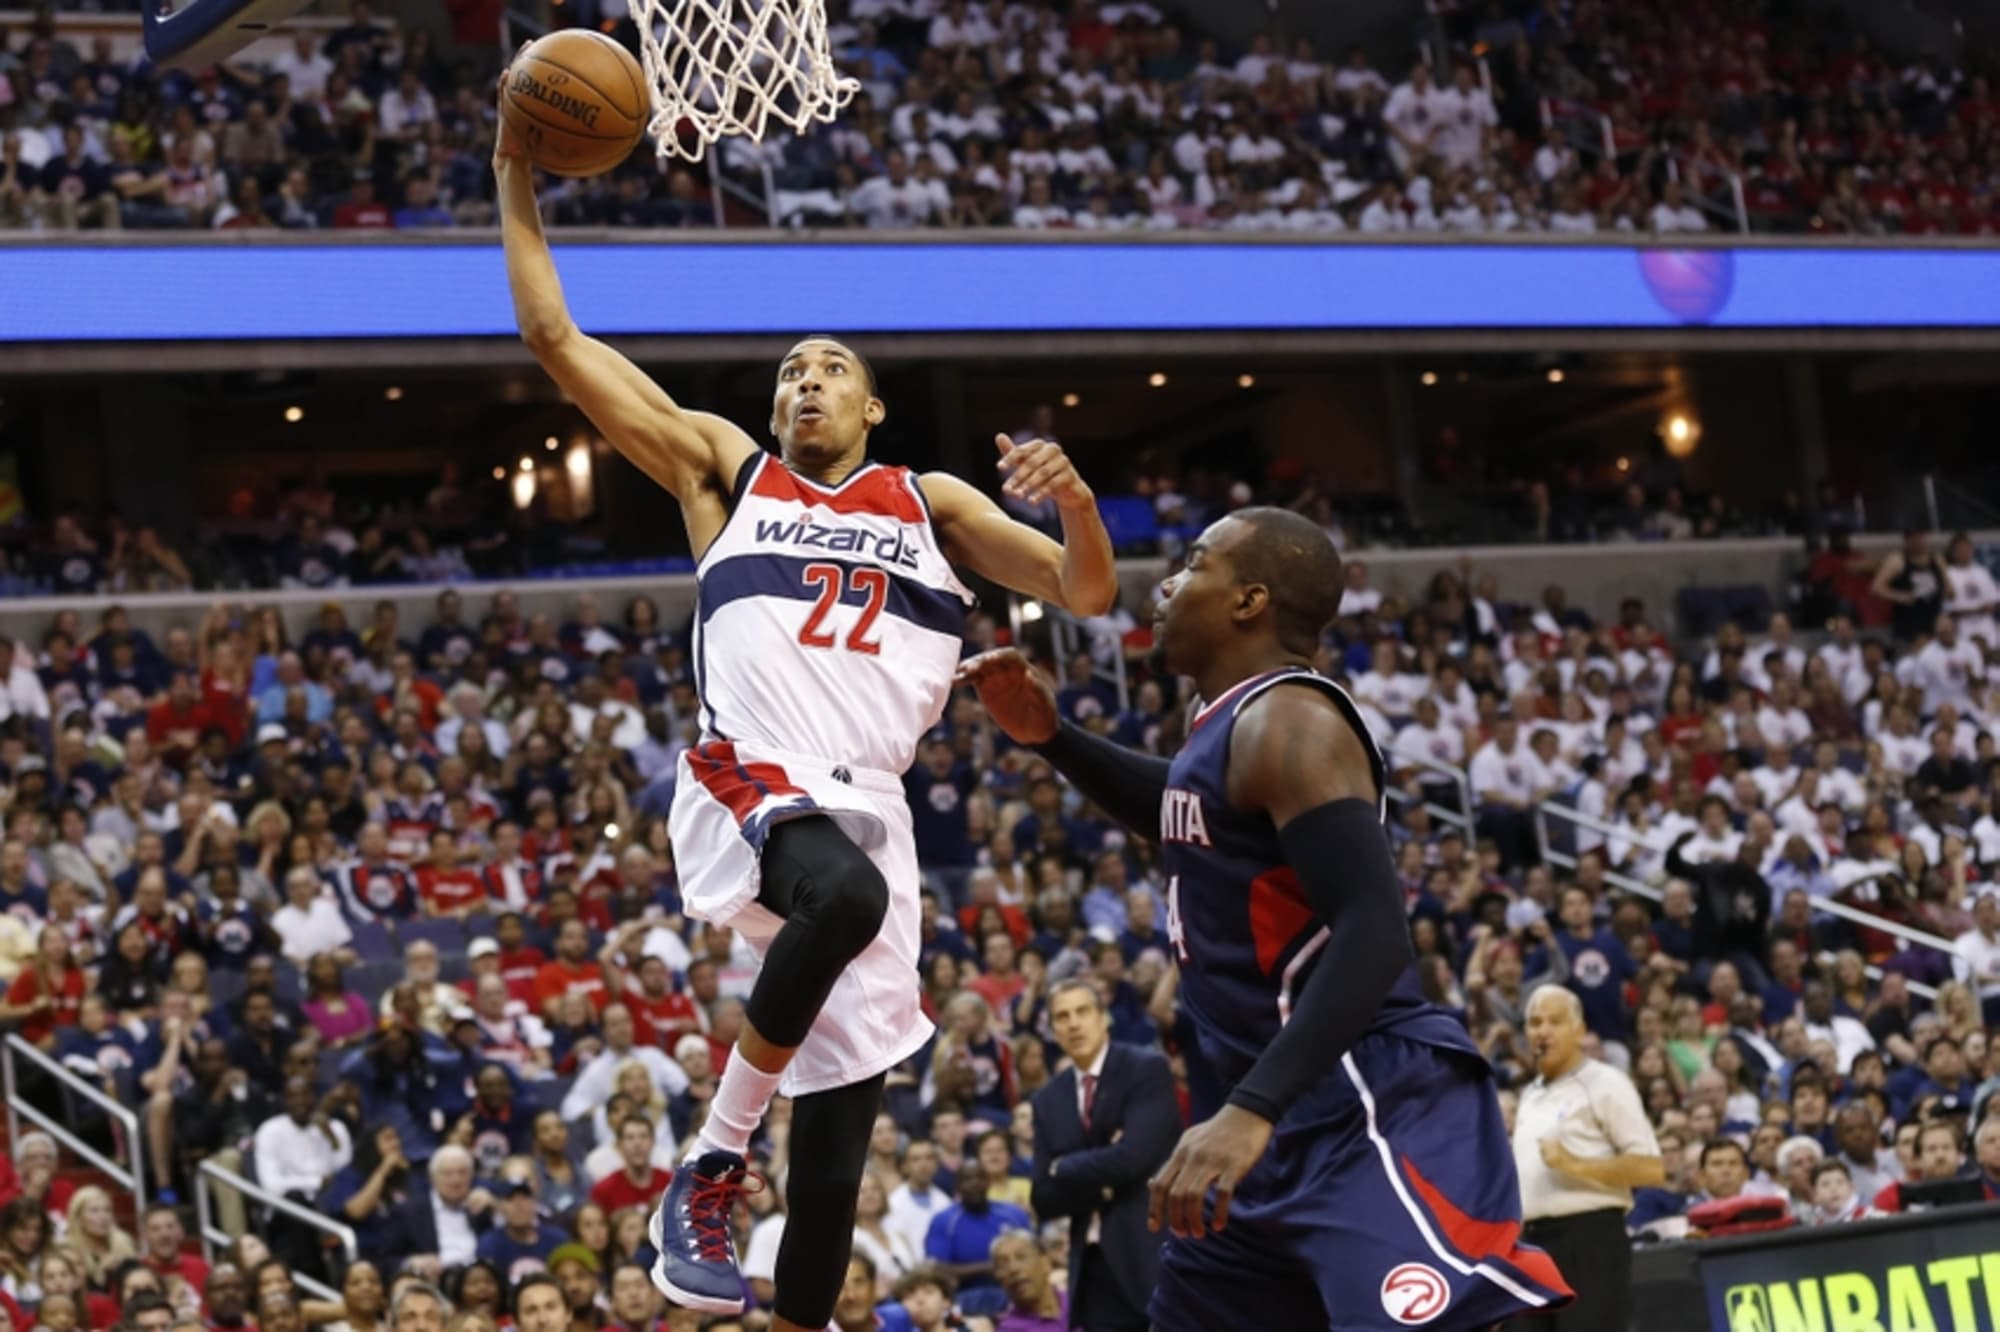 Paul Pierce: I Called Game, Hawks vs Wizards, Game 3, May 9, 2015